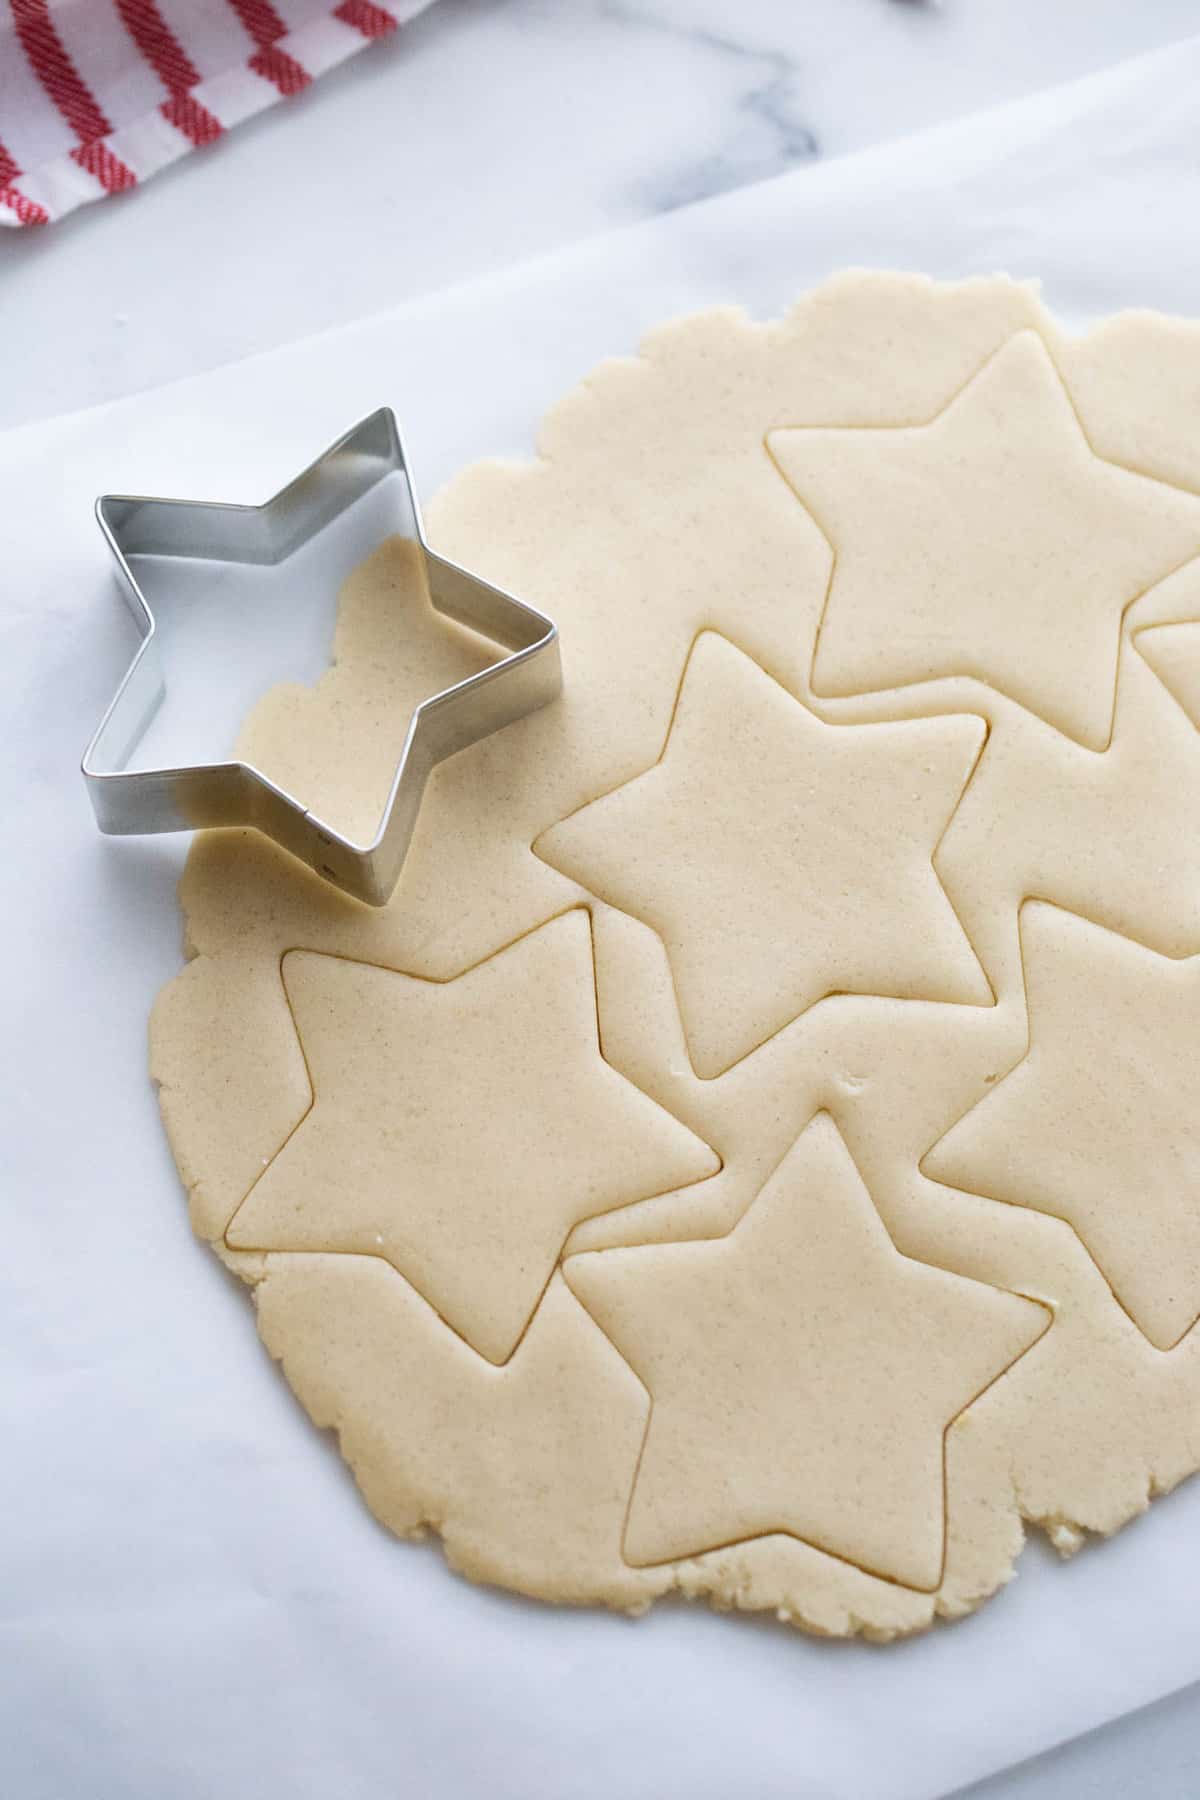 Gluten free cookie dough rolled out and cut into star shapes on parchment paper.